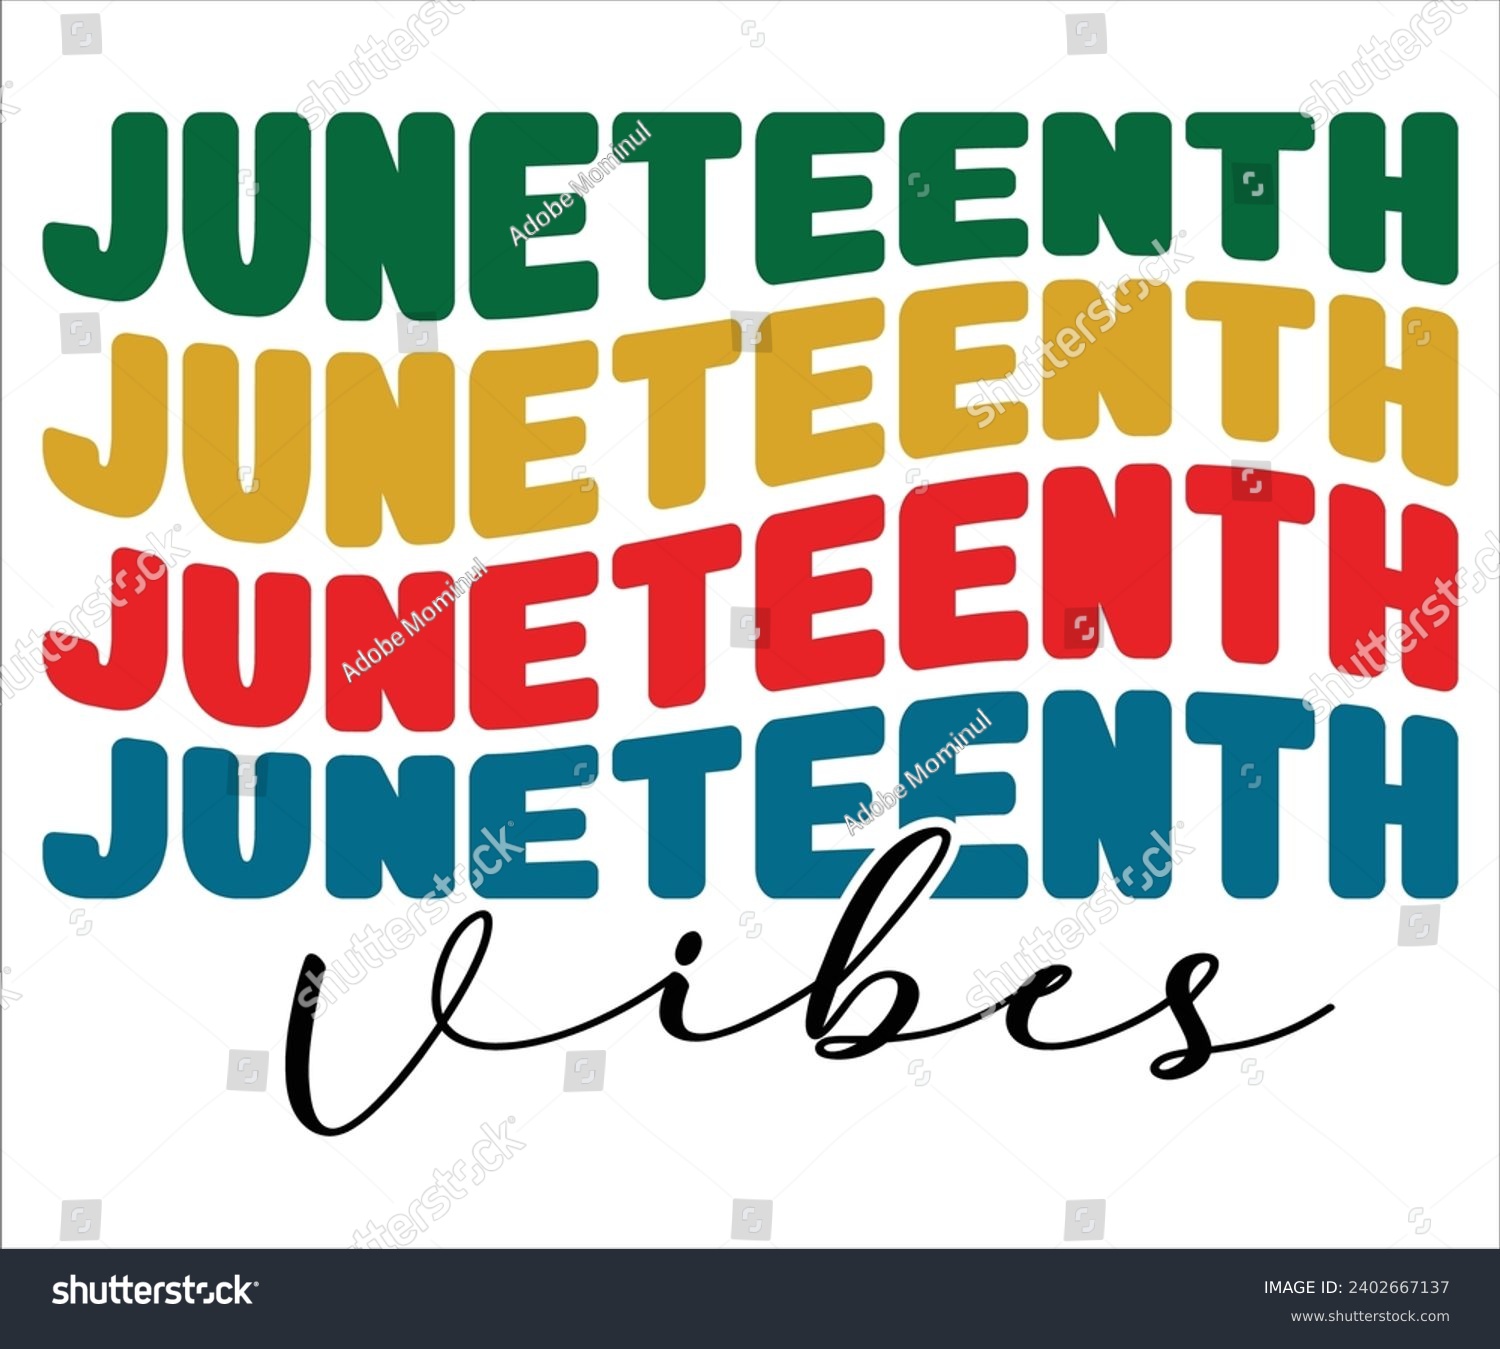 SVG of Juneteenth Vibes Svg,Black History Month Svg,Retro,Juneteenth Svg,Black History Quotes,Black People Afro American T shirt,BLM Svg,Black Men Woman,In February in United States and Canada svg